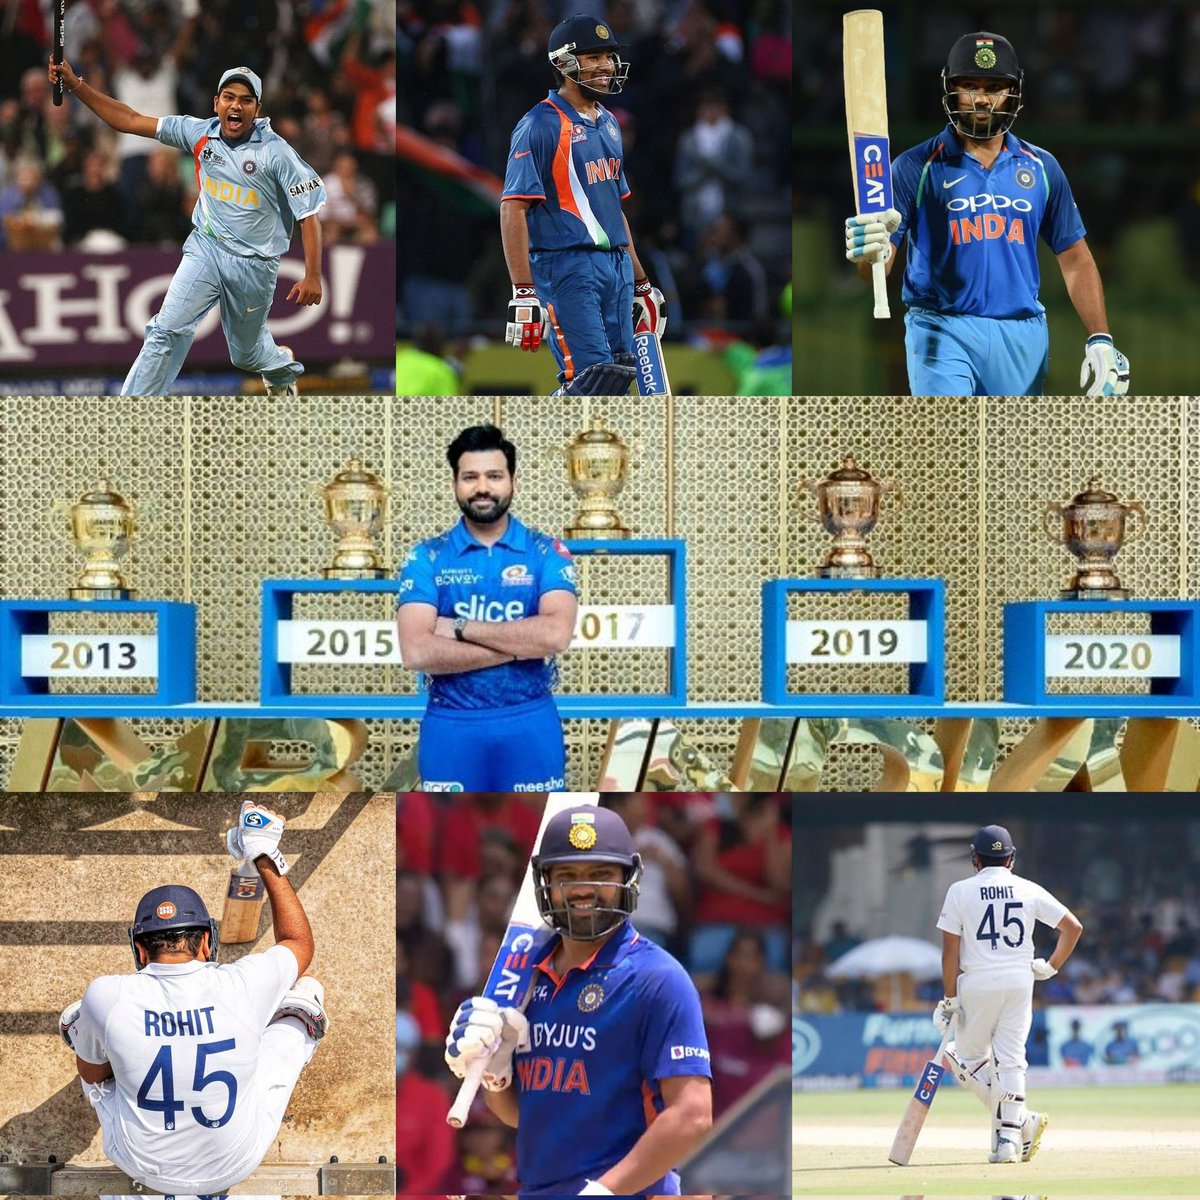 Rohit Sharma is the only cricketer along with Lakshamipati Balaji, Pragya Ojha and Irfan Pathan who won IPL with two different teams including Deccan Chargers and Mumbai Indians.
@ImRo45

#HappyBirthdayRohit 
#RohitSharma𓃵